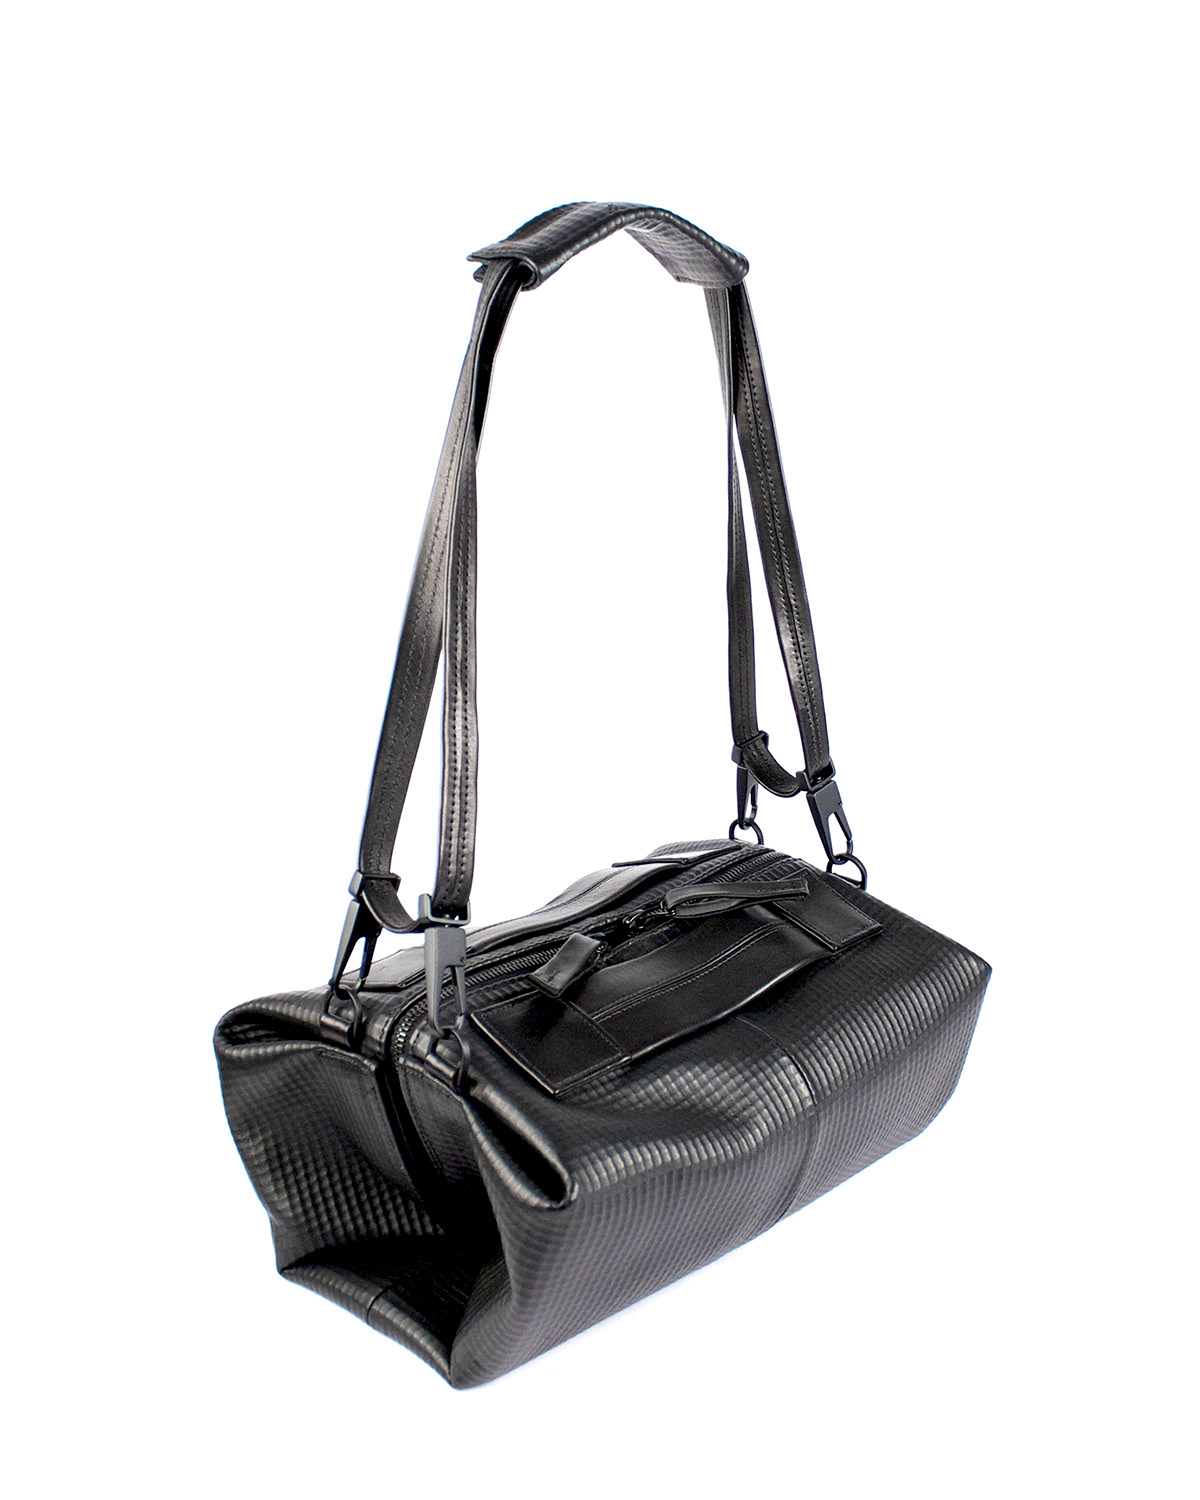 leather leatherbags handbags accessories madeinnyc bags travelbags softgoods Menswear womenswear